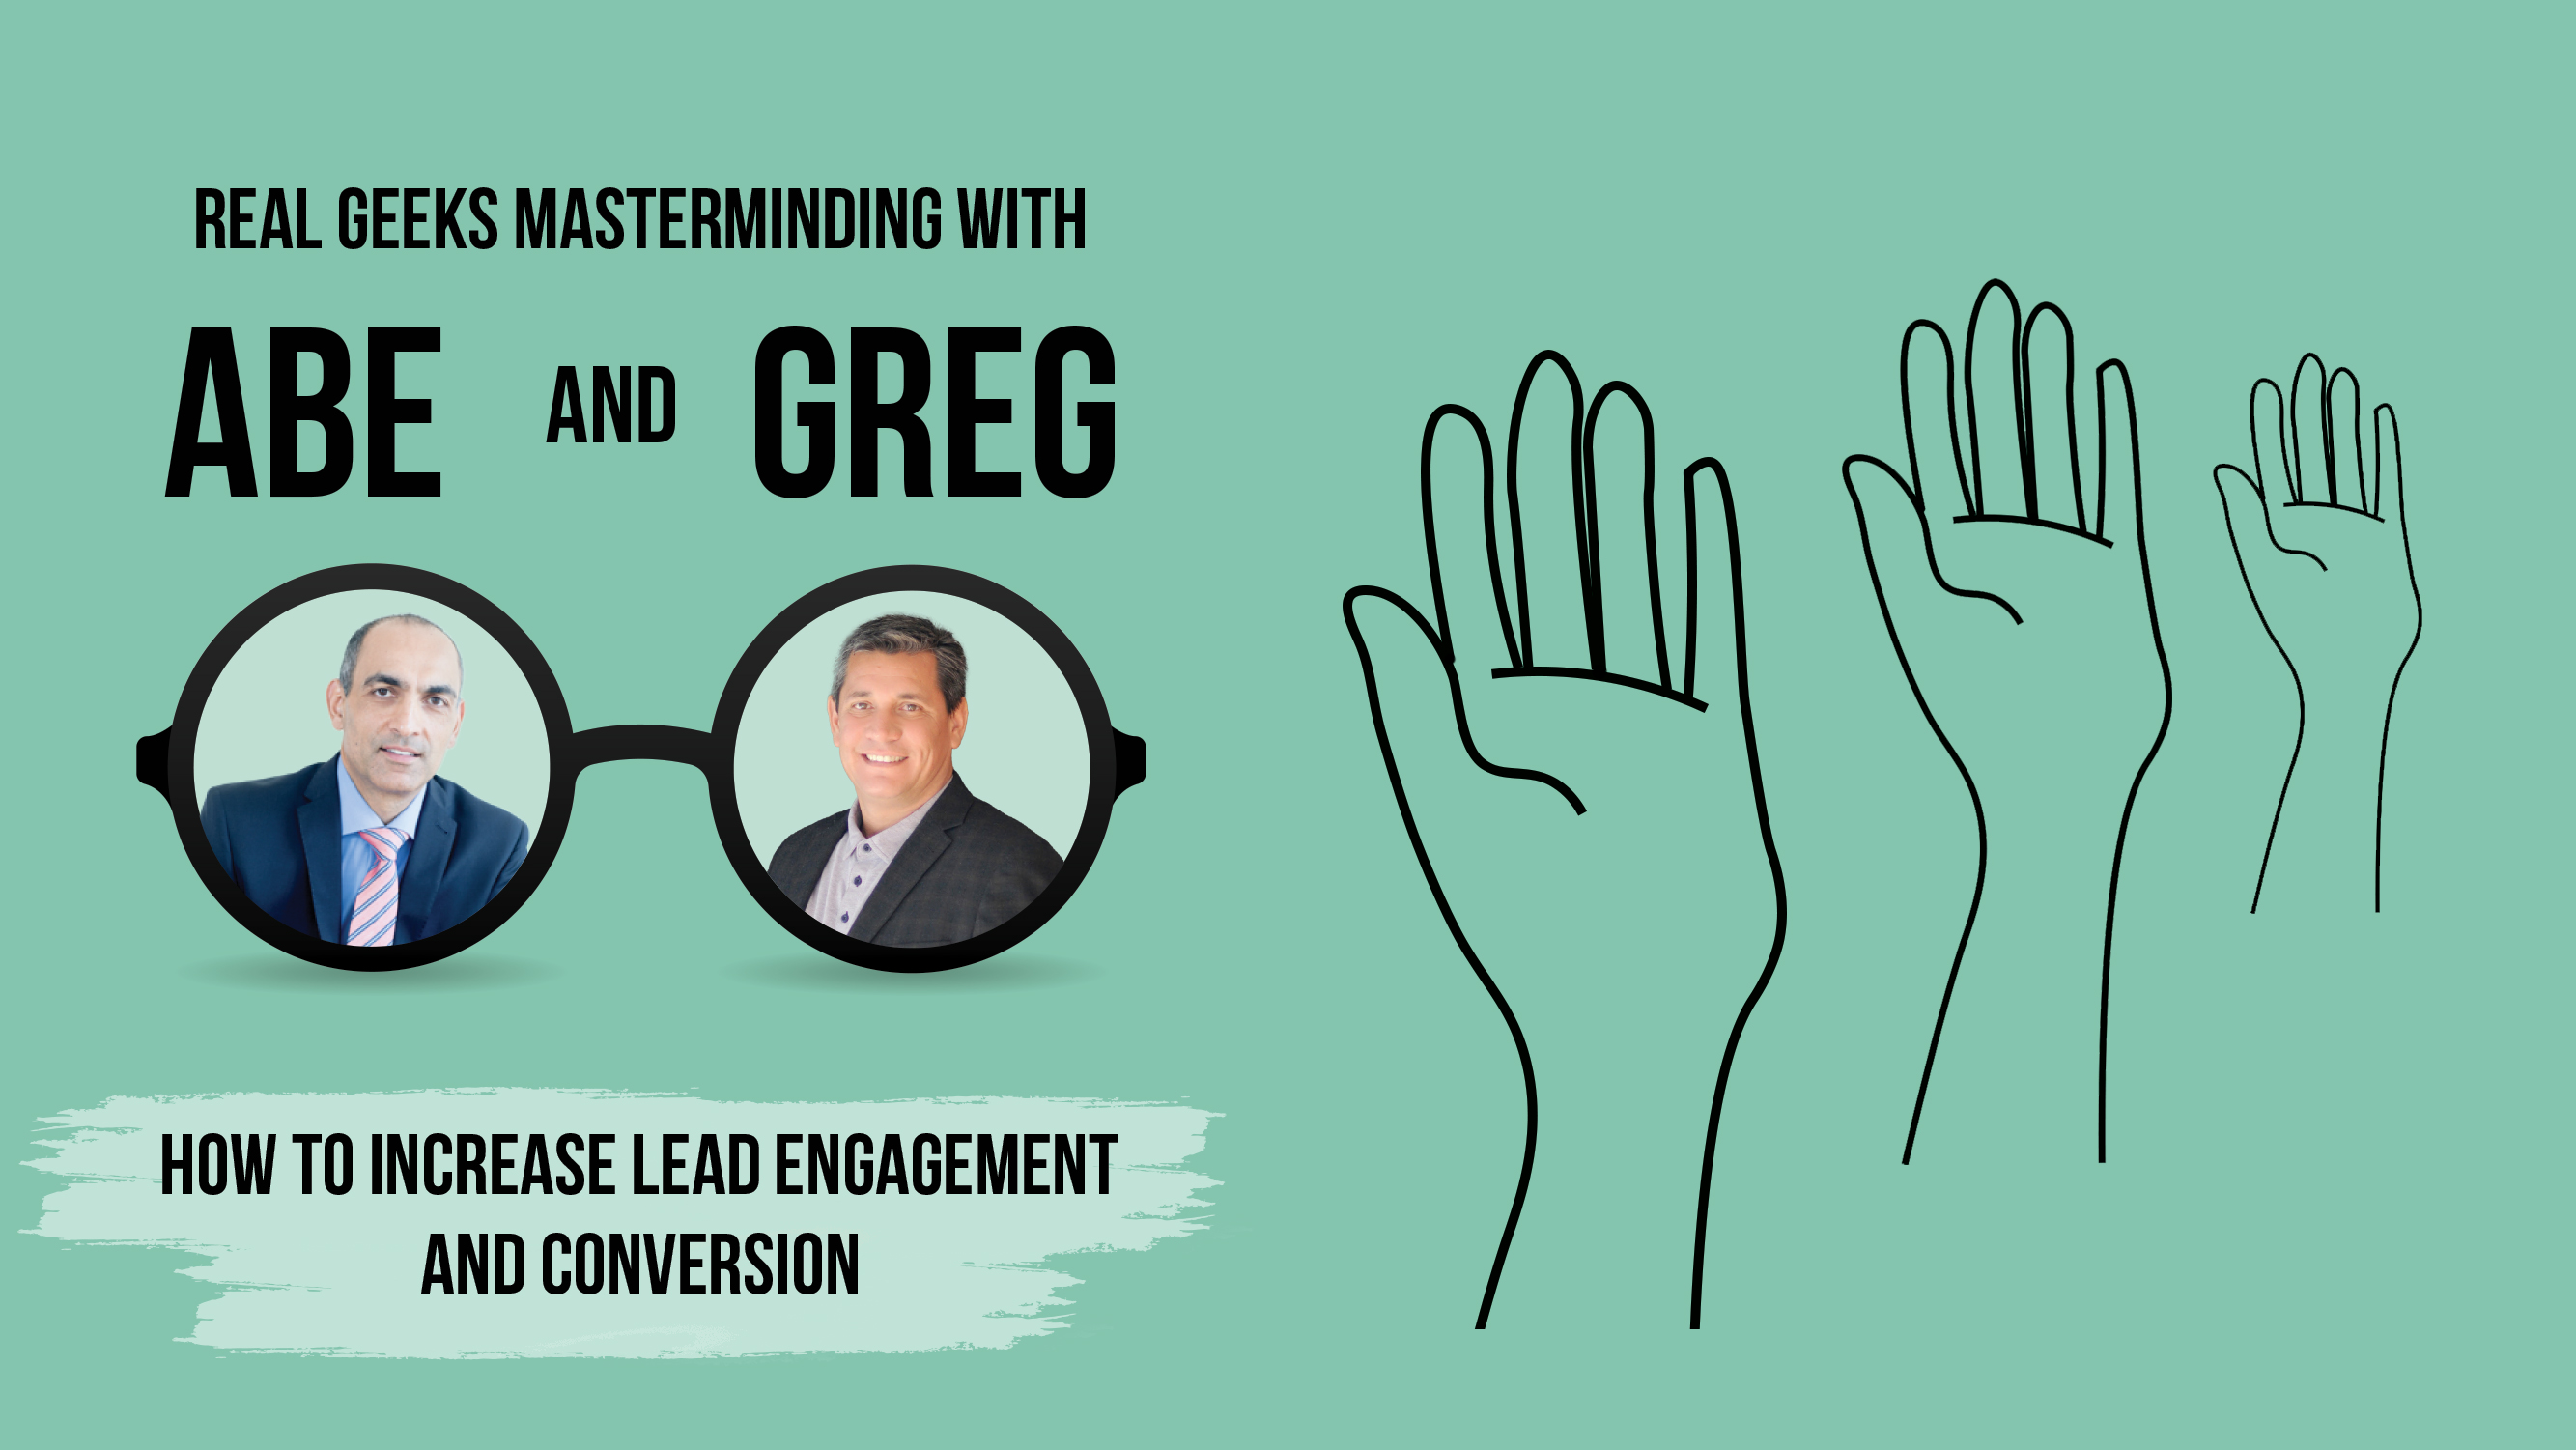 How To Increase Lead Engagement and Conversion